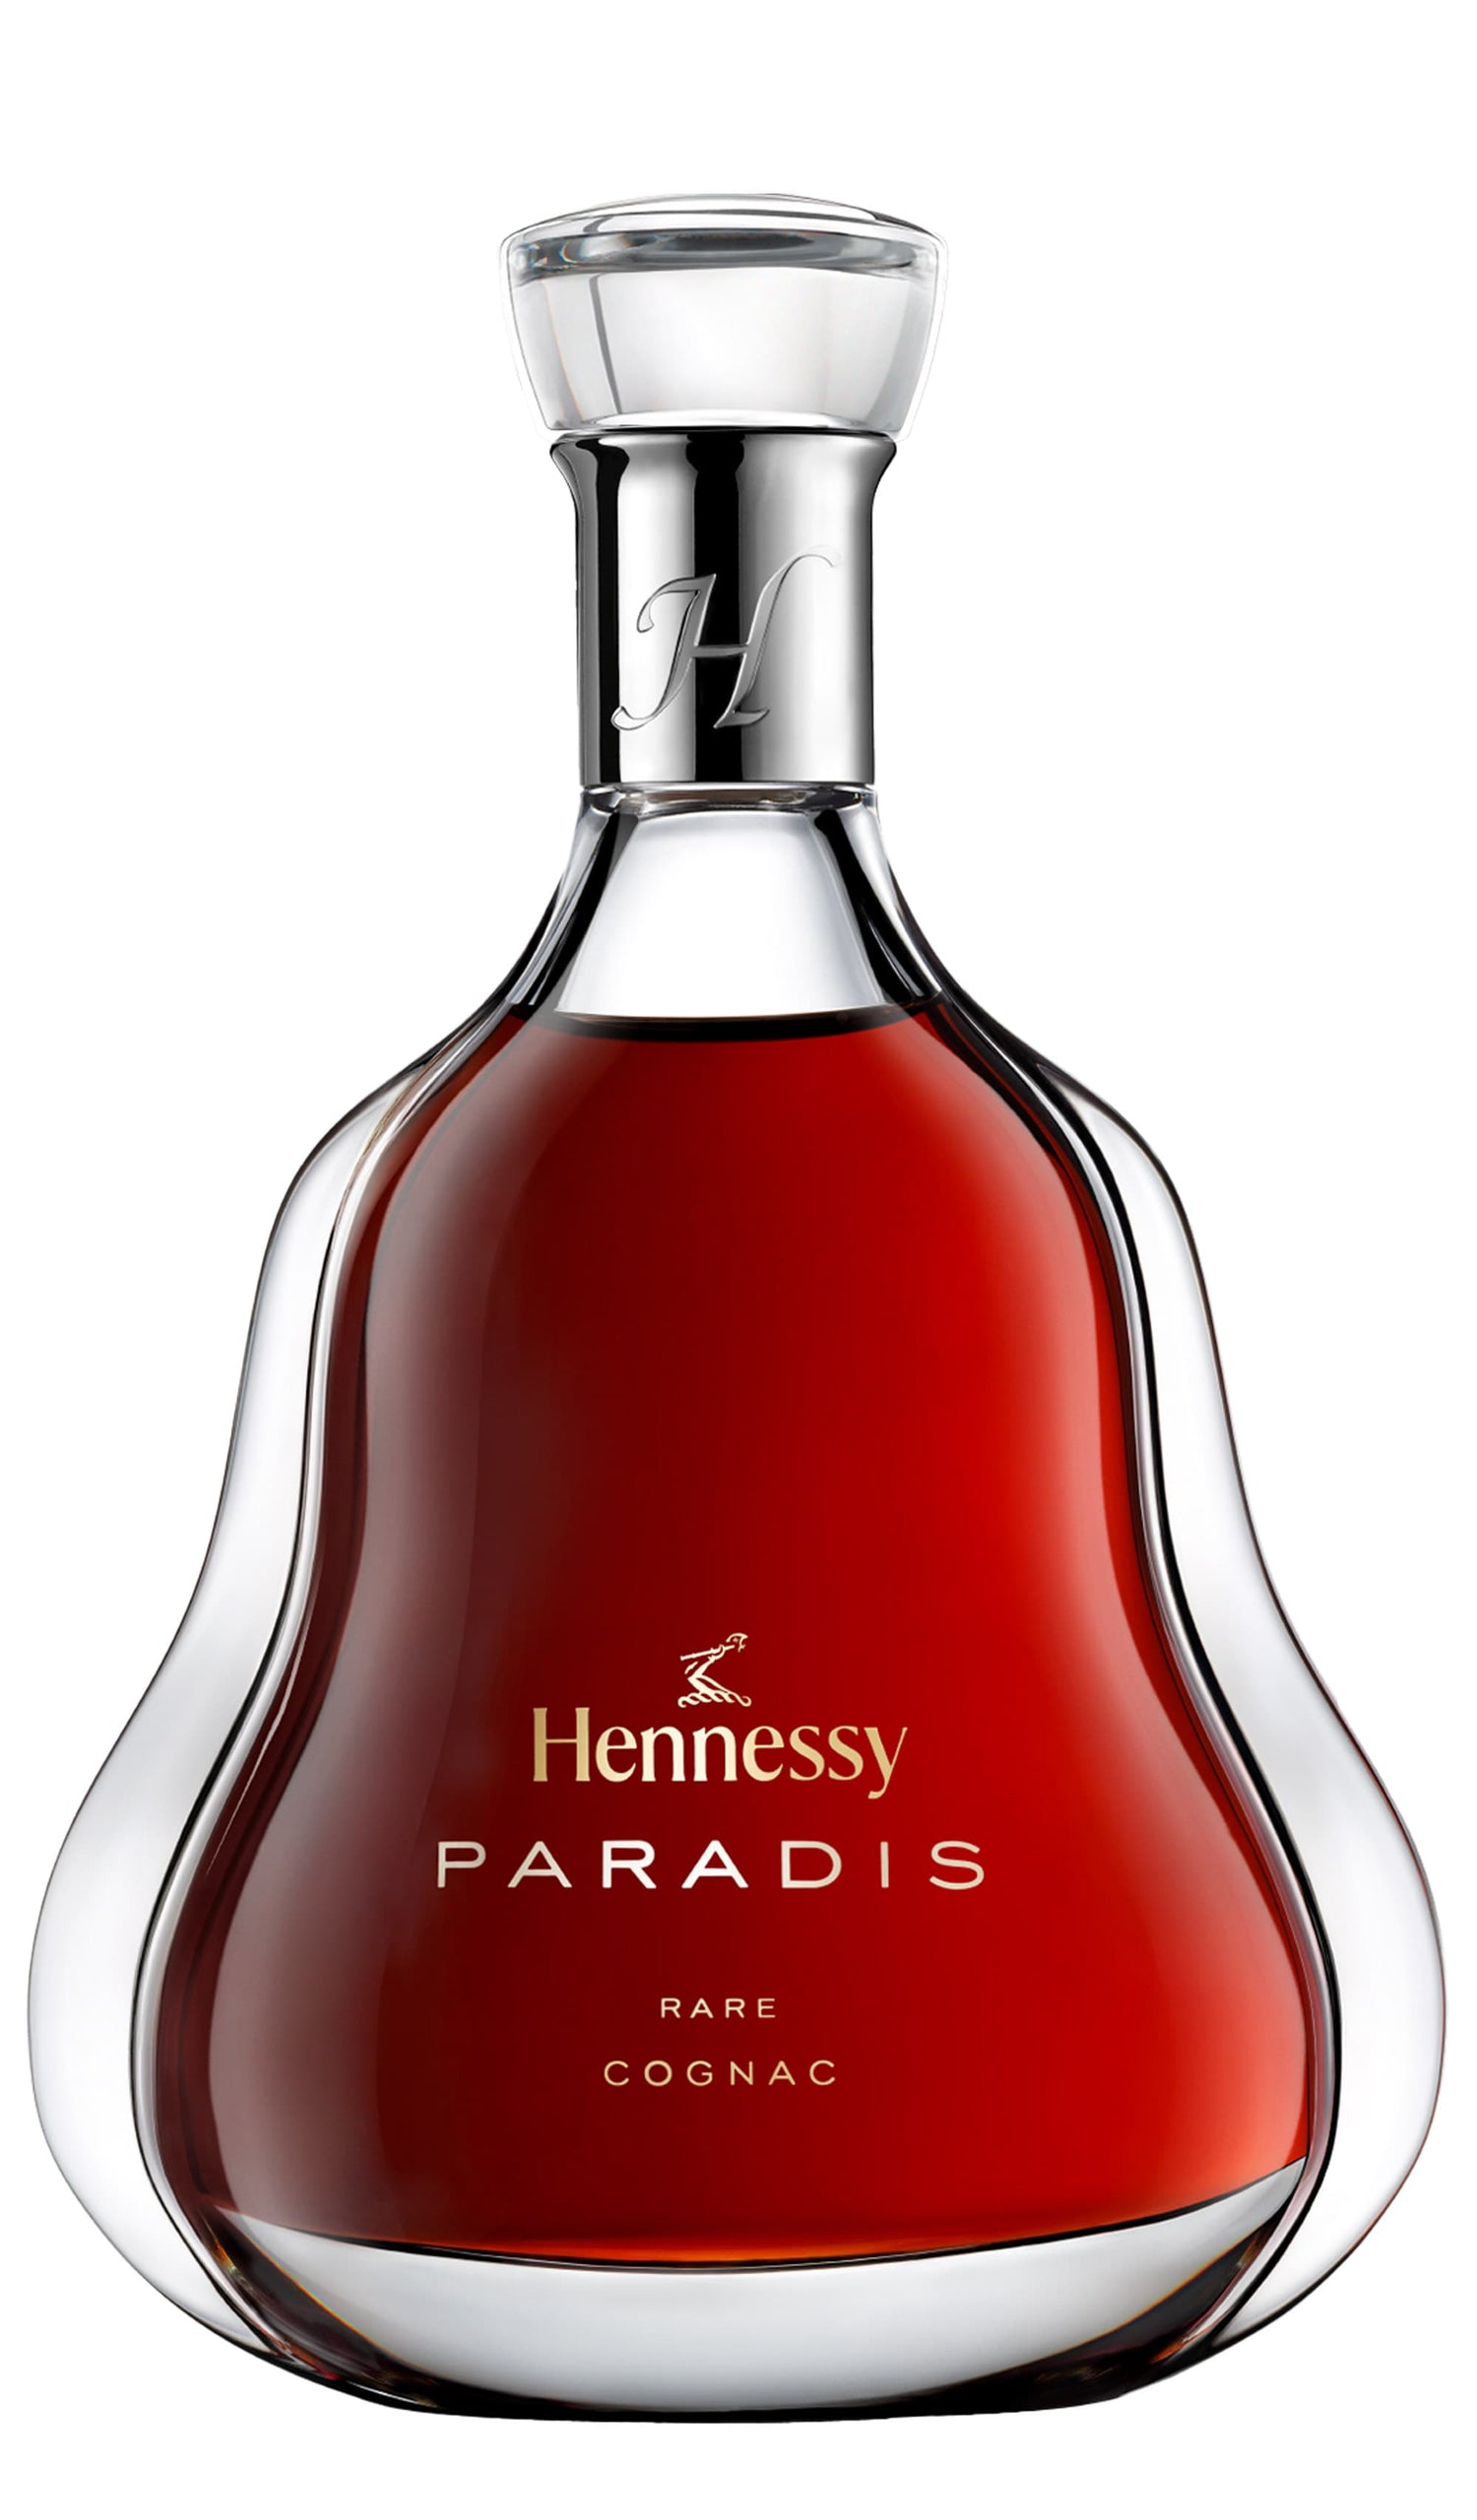 Find out more, explore the range and buy Hennessy Paradis Rare Cognac 700mL available online at Wine Sellers Direct - Australia's independent liquor specialists.